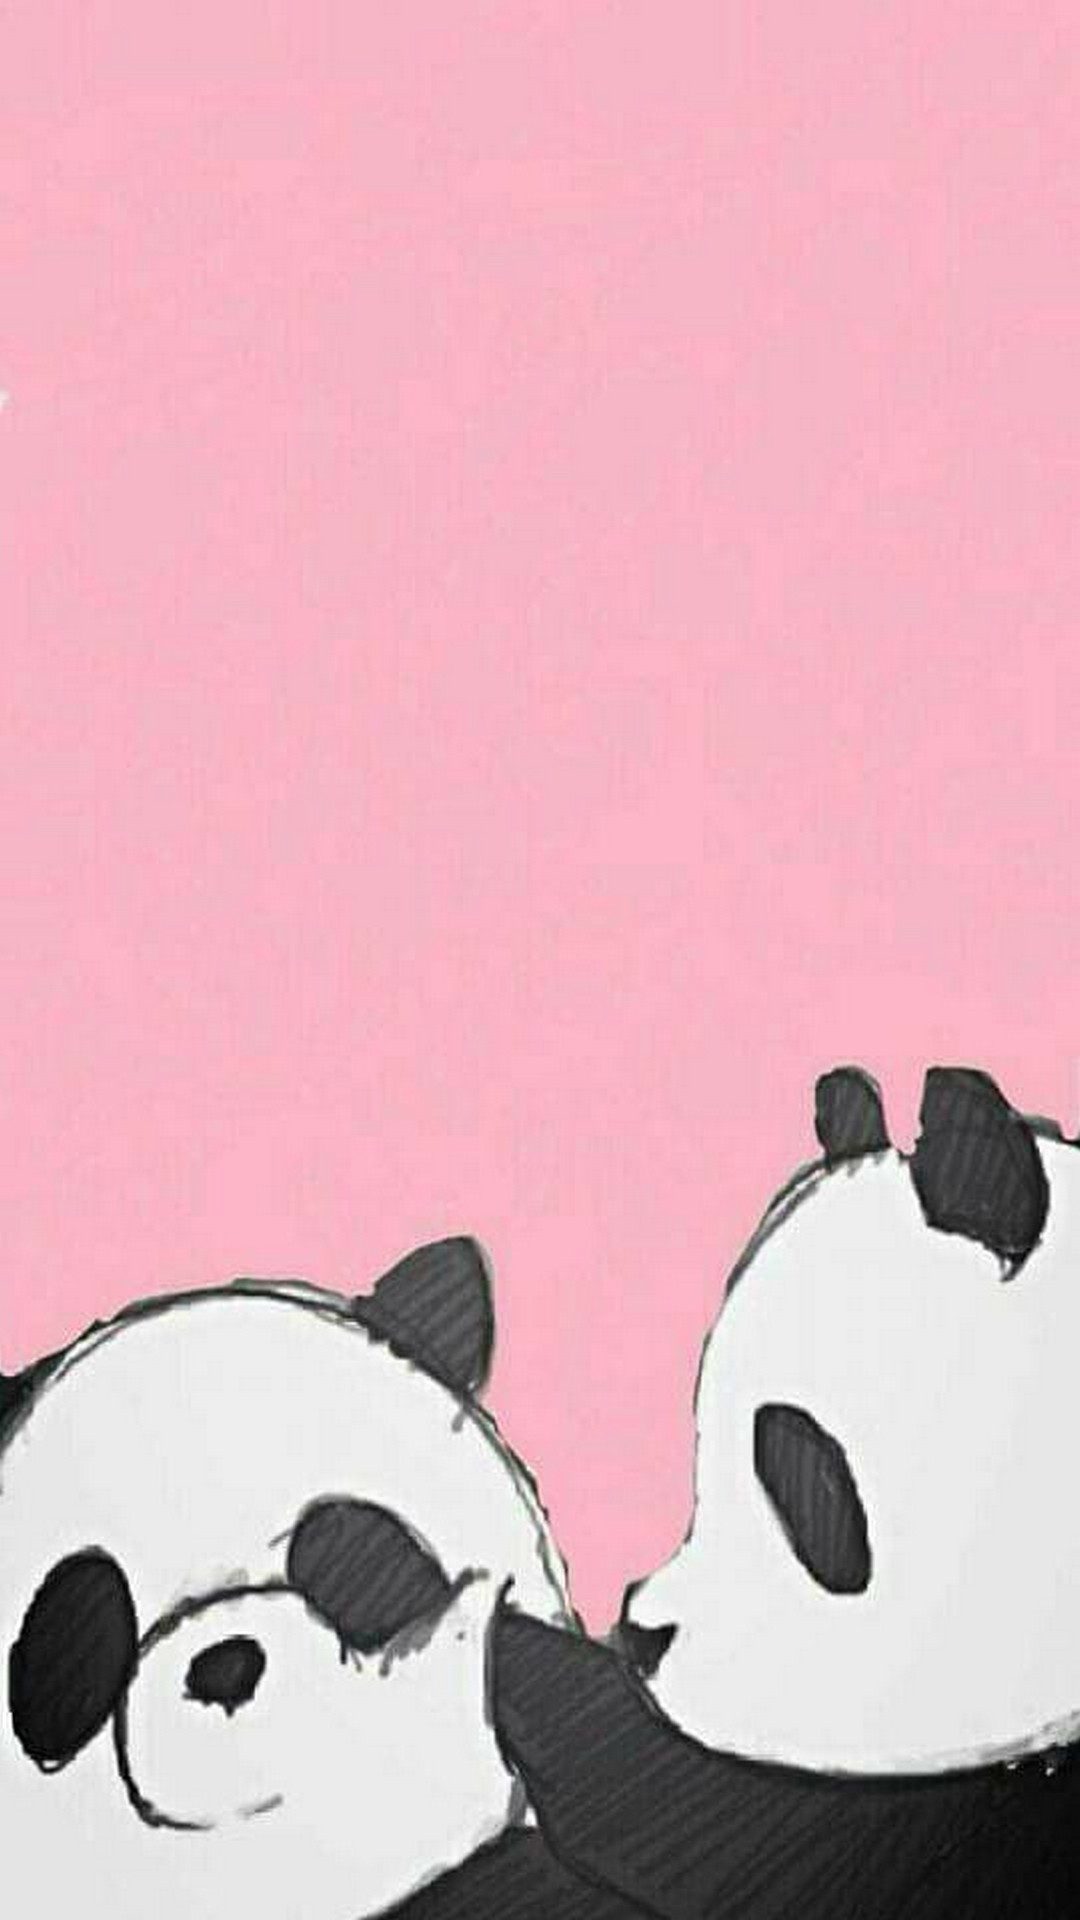 Panda Wallpaper For Mobile Android Resolution 1080x1920